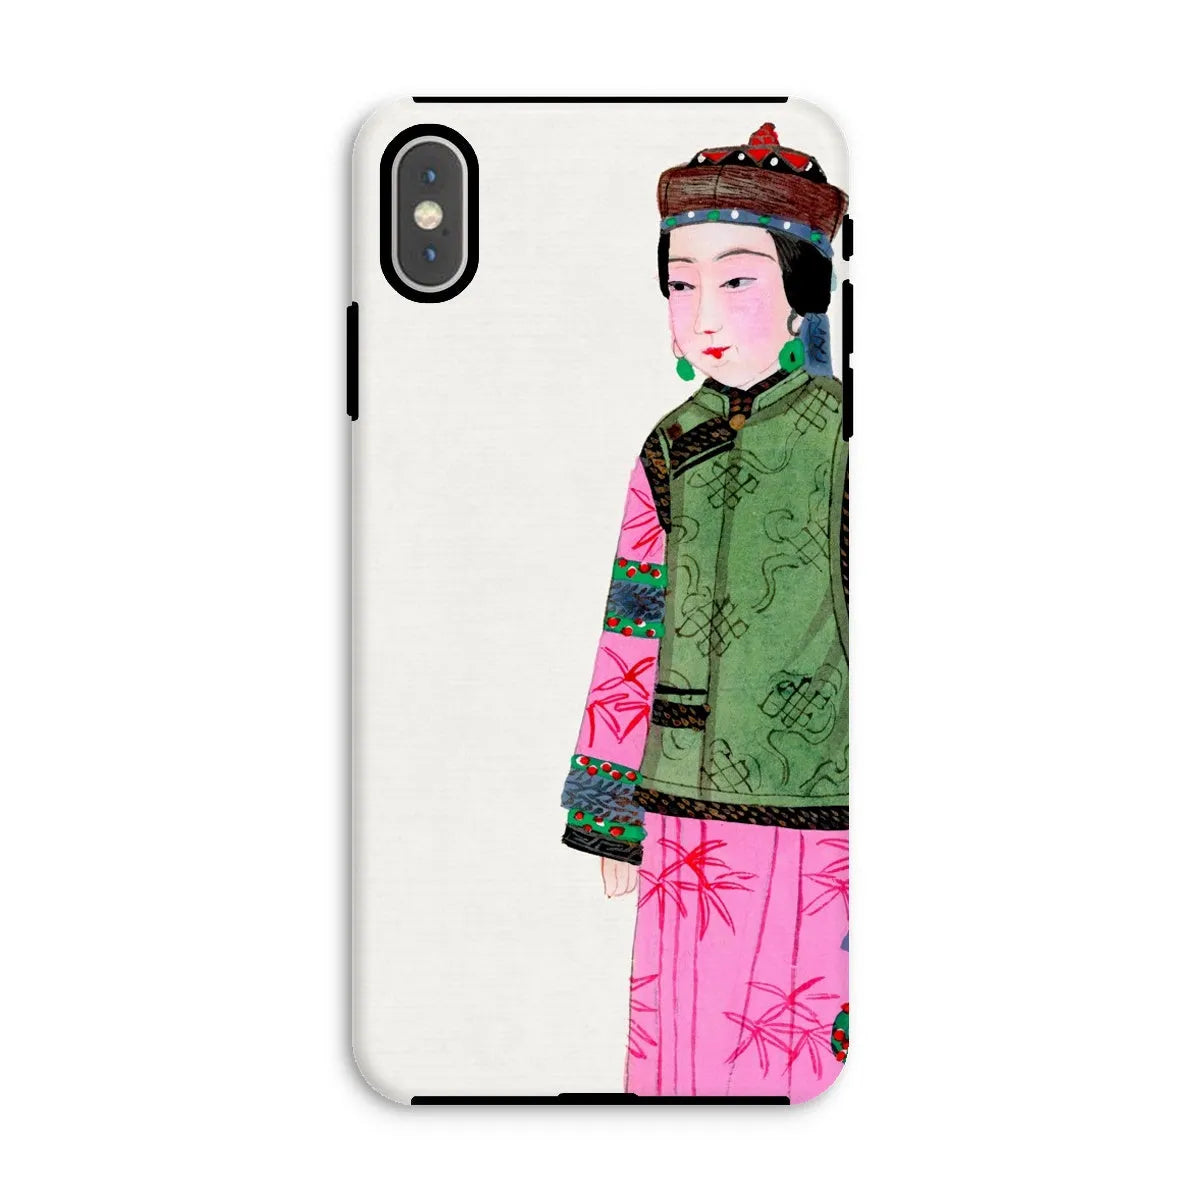 Noblewoman In Winter - Chinese Aesthetic Art Phone Case - Iphone Xs Max / Matte - Mobile Phone Cases - Aesthetic Art